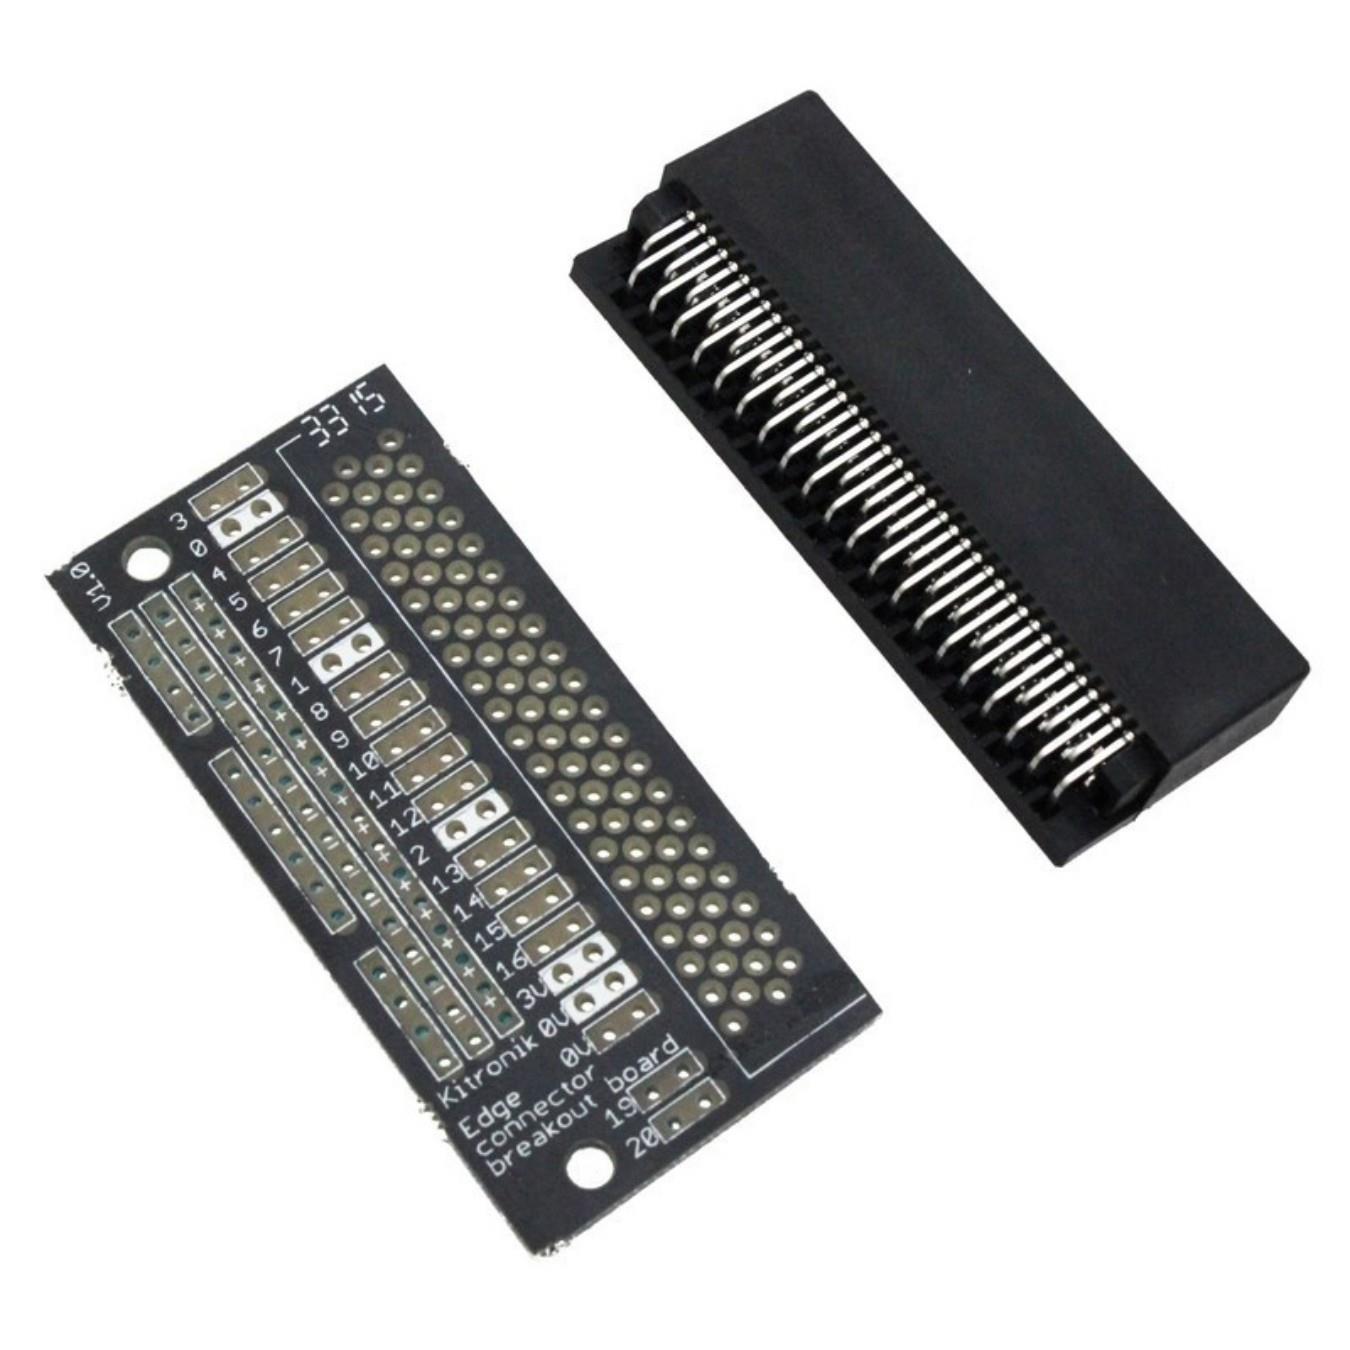 Kitronik Edge Connector Breakout Board for the BBC micro:bit -Click to Enlarge